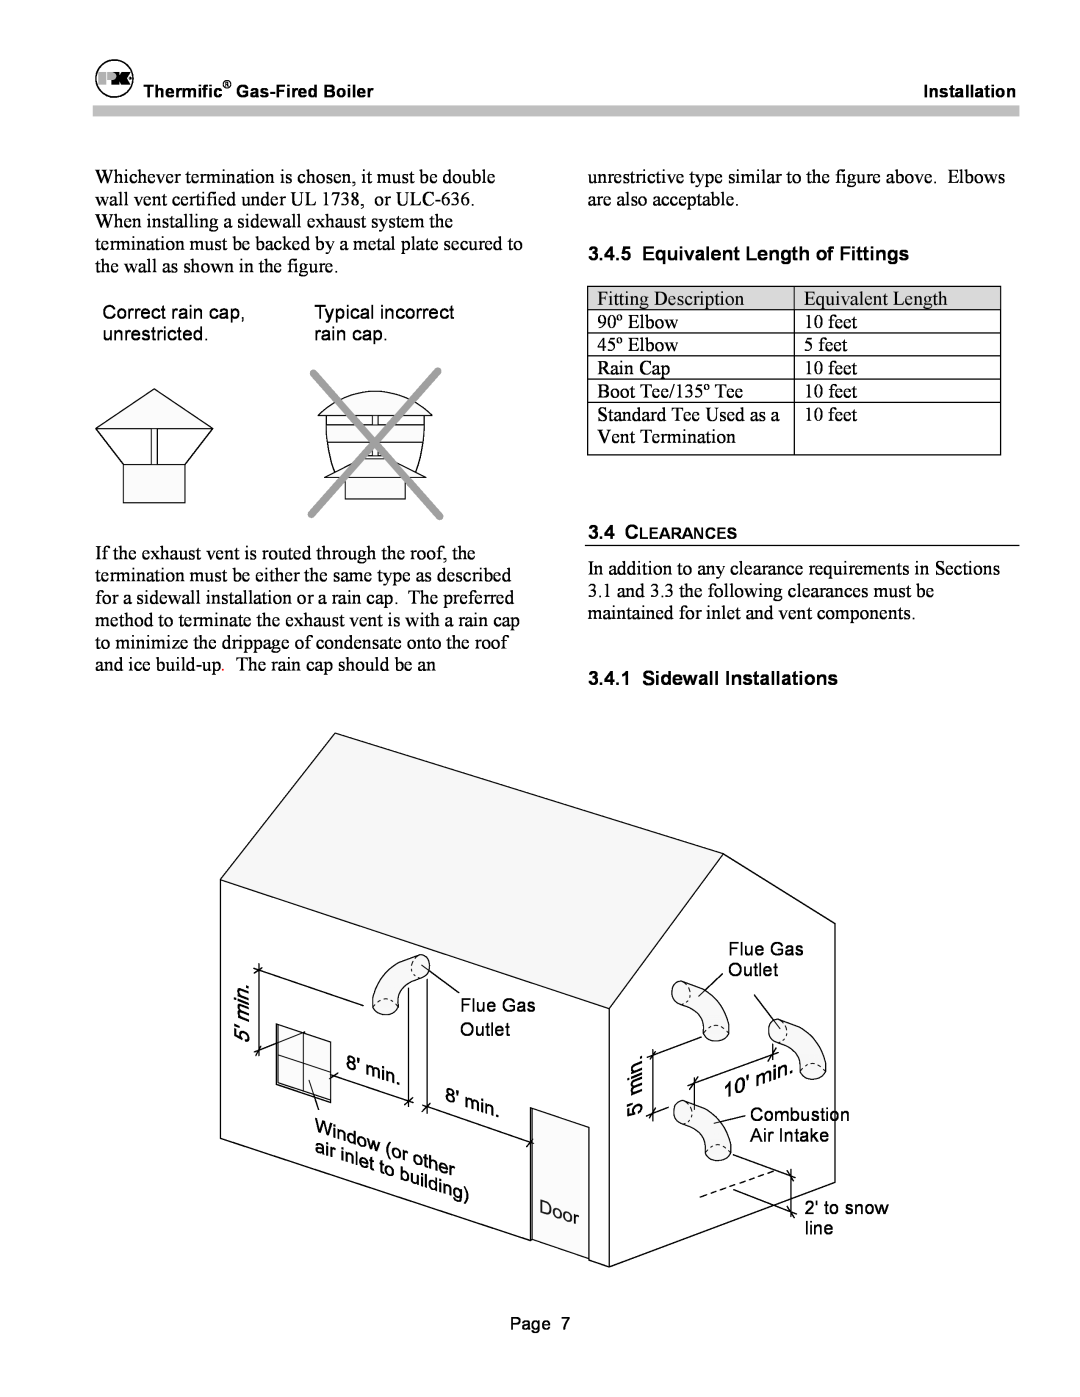 Patterson-Kelley DVSCM-02 owner manual Equivalent Length of Fittings, Sidewall Installations 